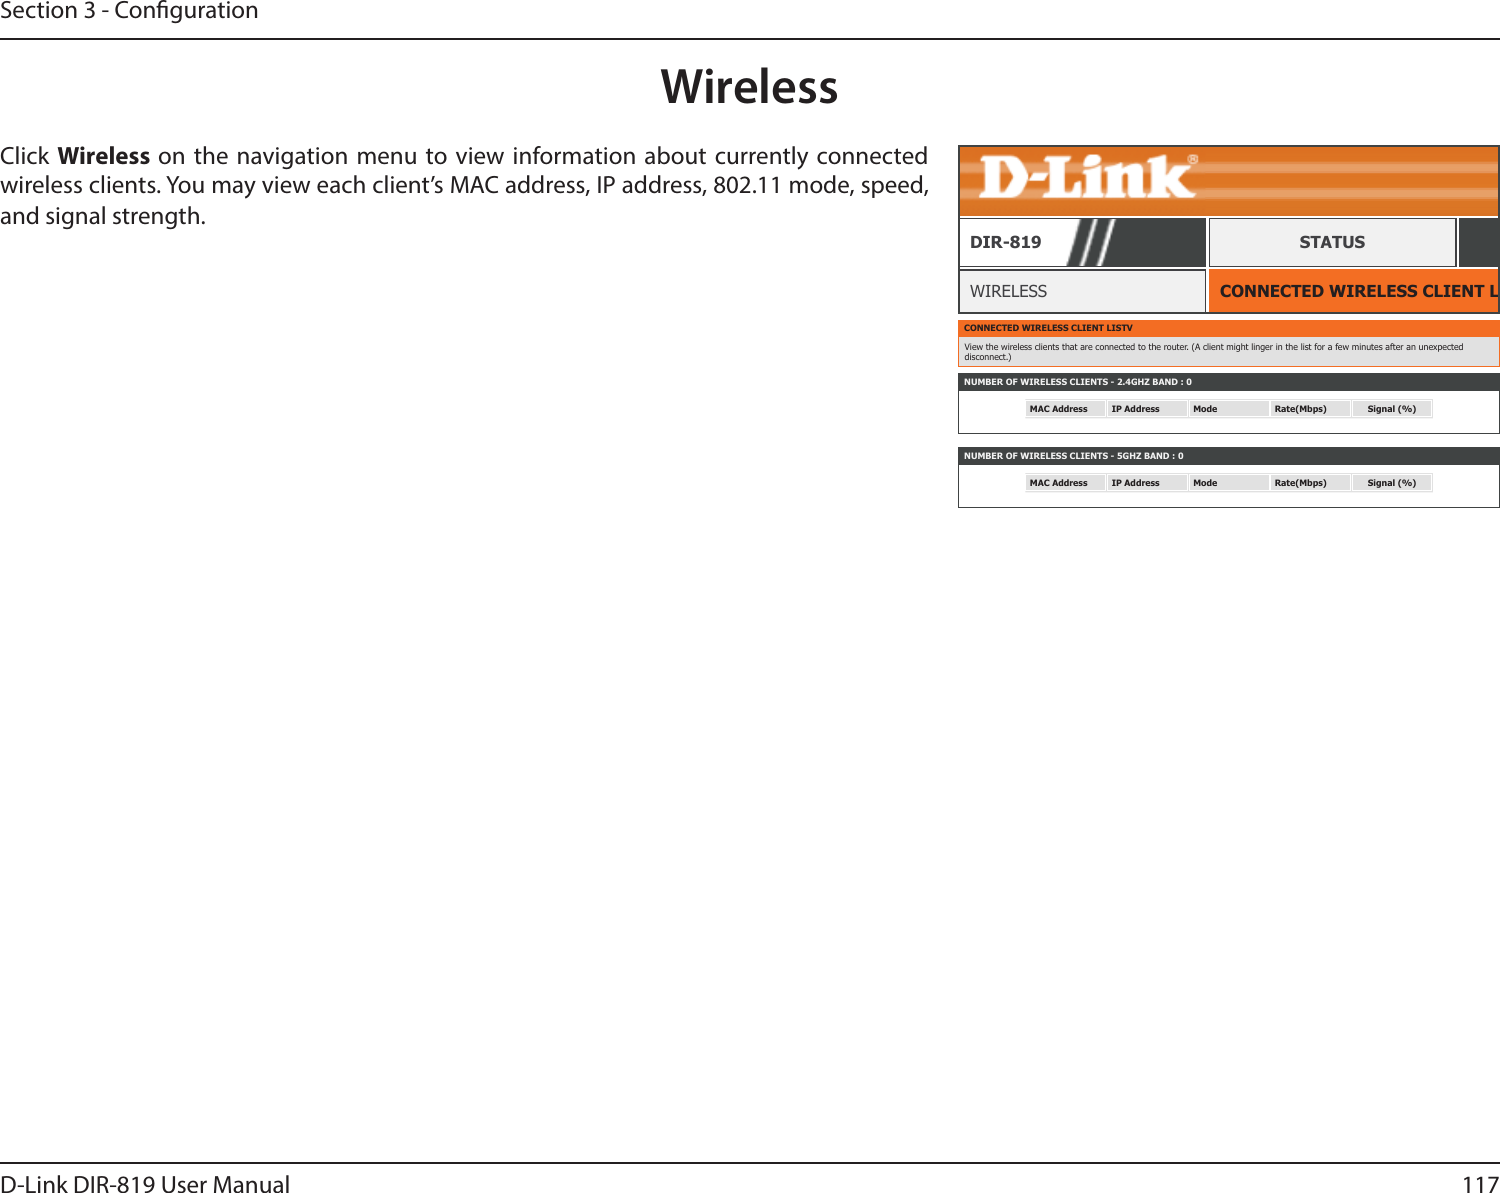 117D-Link DIR-819 User ManualSection 3 - CongurationWirelessCONNECTED WIRELESS CLIENT LISTWIRELESSDIR-819 STATUSClick Wireless on the navigation menu to view information about currently connected wireless clients. You may view each client’s MAC address, IP address, 802.11 mode, speed, and signal strength.CONNECTED WIRELESS CLIENT LISTVView the wireless clients that are connected to the router. (A client might linger in the list for a few minutes after an unexpected disconnect.)NUMBER OF WIRELESS CLIENTS - 2.4GHZ BAND : 0MAC Address IP Address Mode Rate(Mbps) Signal (%)NUMBER OF WIRELESS CLIENTS - 5GHZ BAND : 0MAC Address IP Address Mode Rate(Mbps) Signal (%)